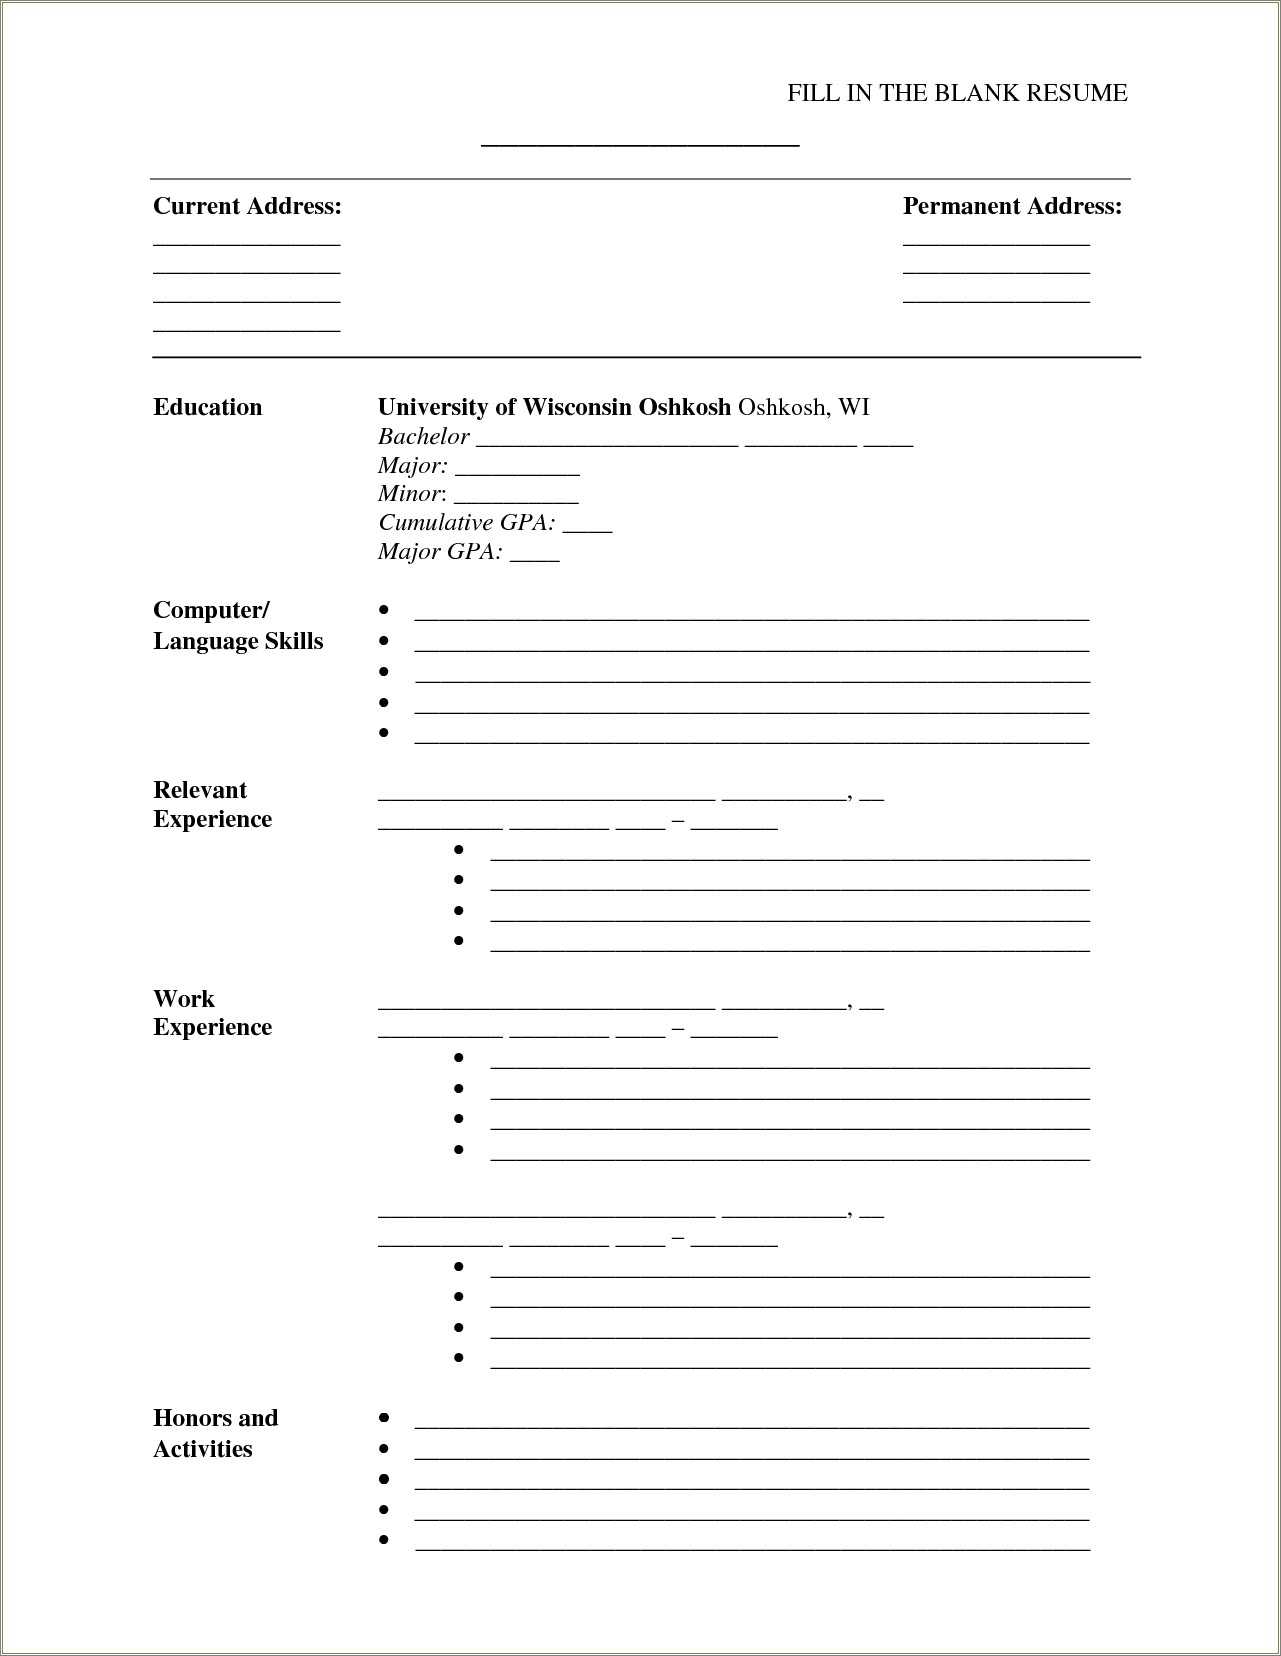 free-printable-fill-in-the-blank-resume-resume-example-gallery